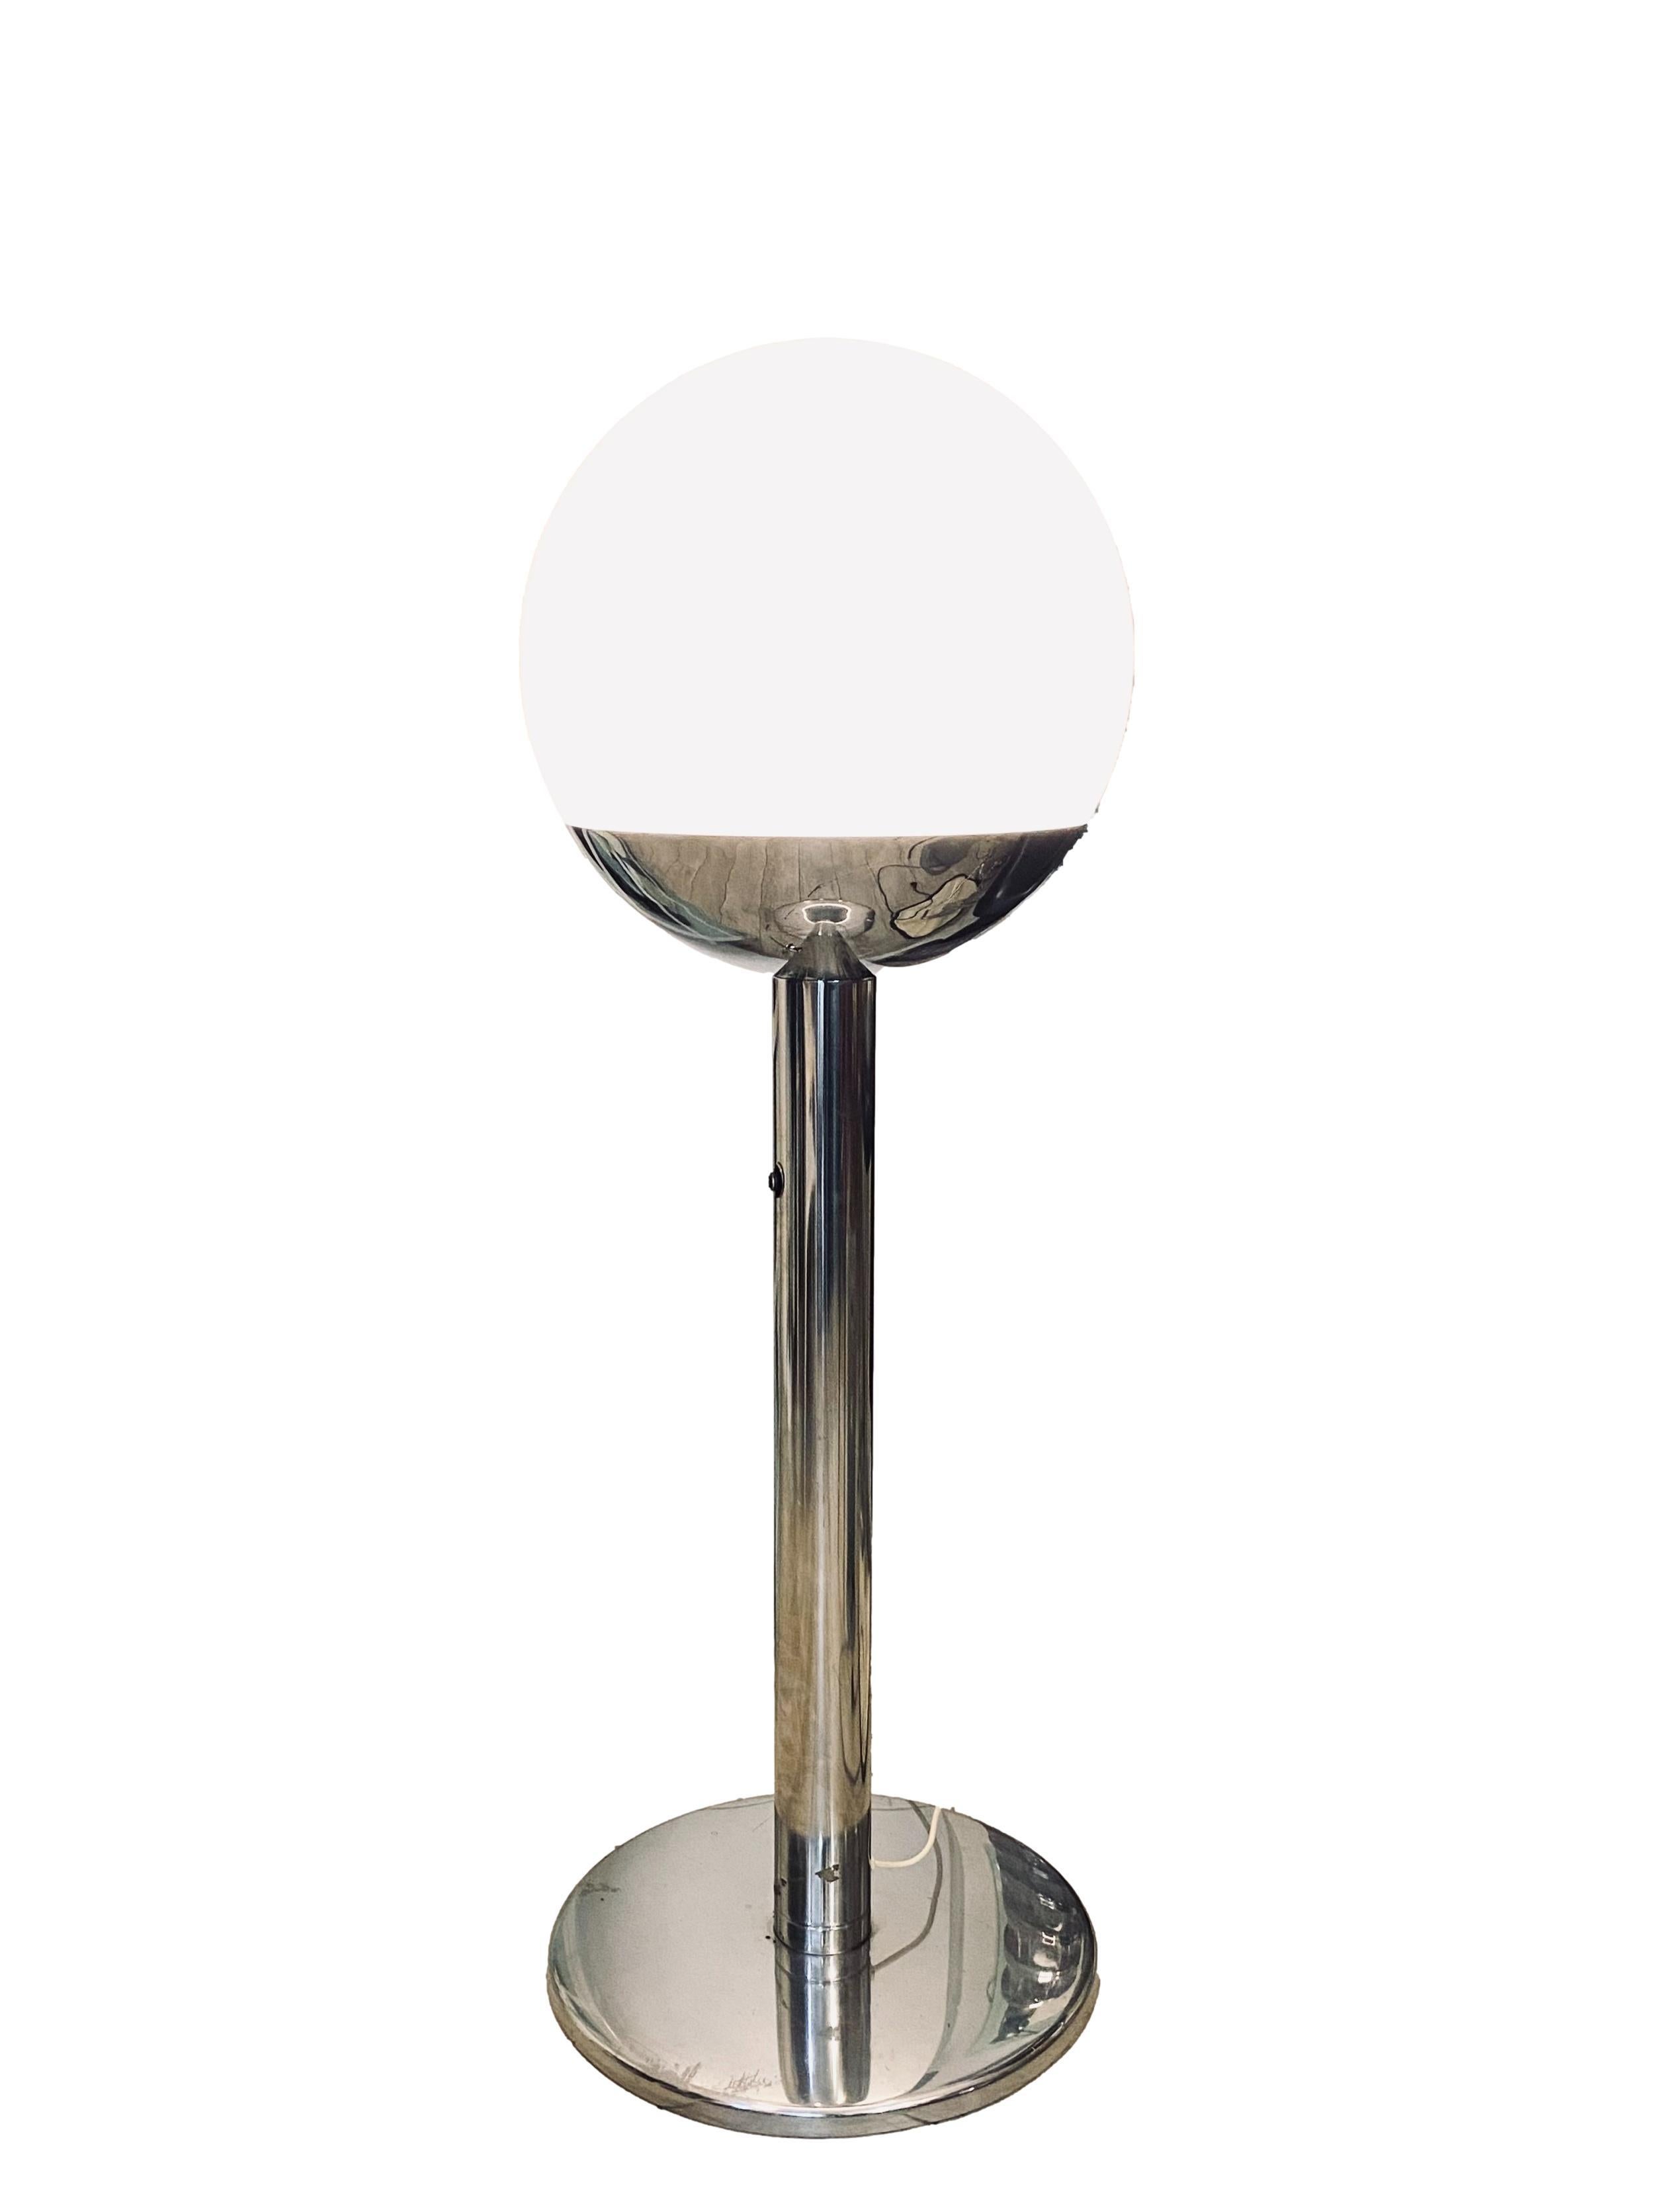 Pia Guidetti Crippa for Luci Glass and Chrome Italian Mod.P428 Floor Lamp, 1970 In Good Condition For Sale In Naples, IT